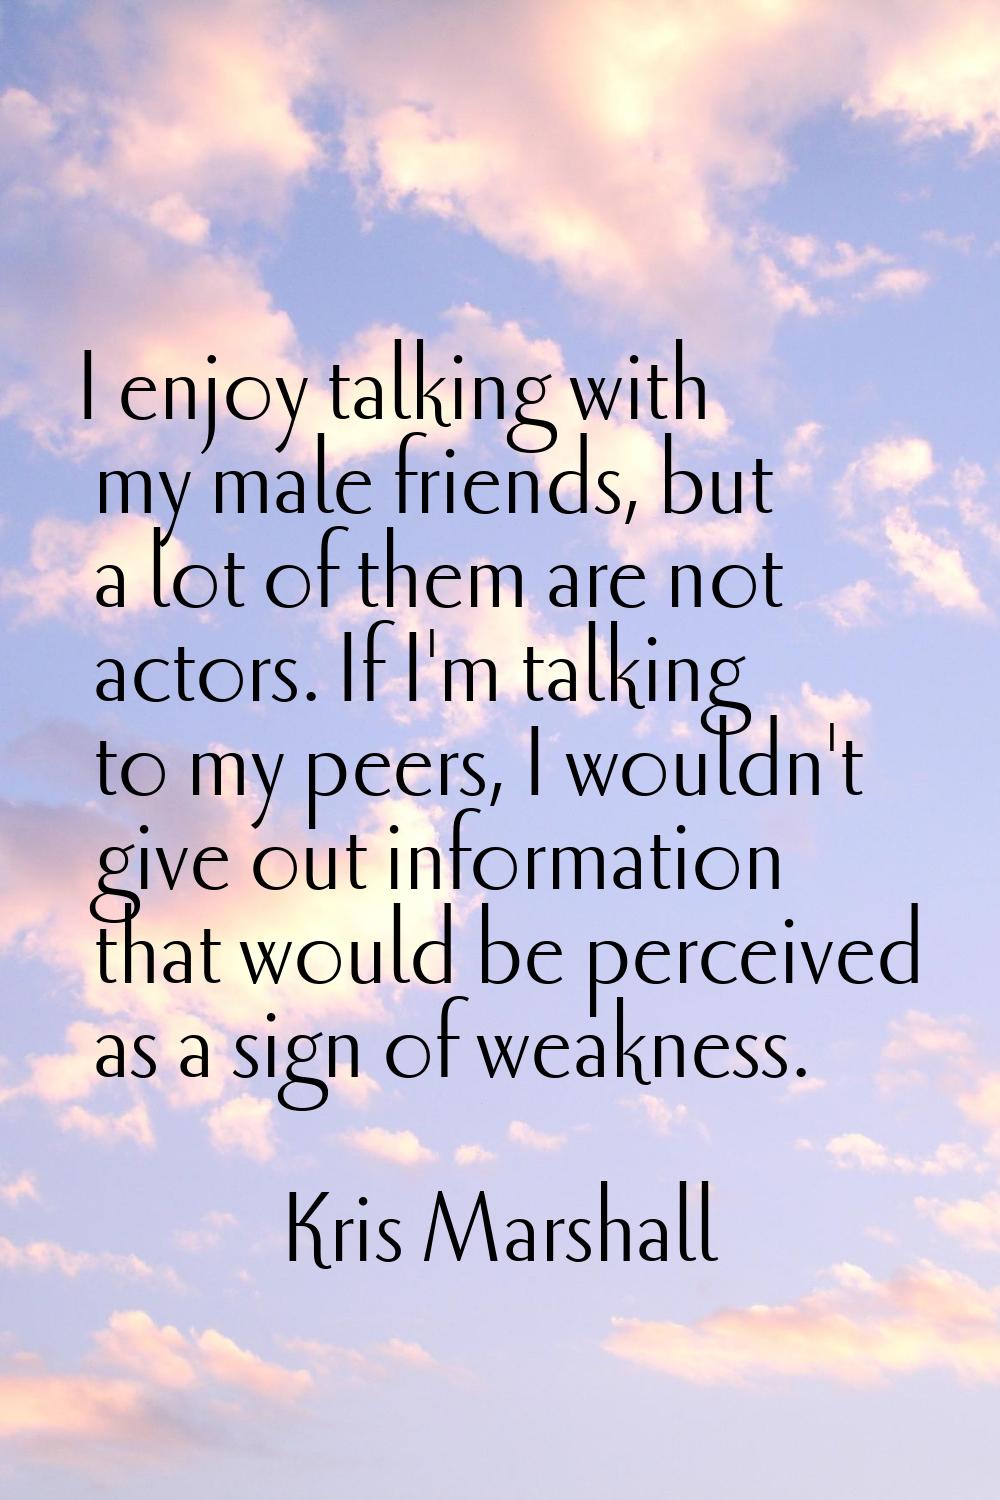 I enjoy talking with my male friends, but a lot of them are not actors. If I'm talking to my peers,